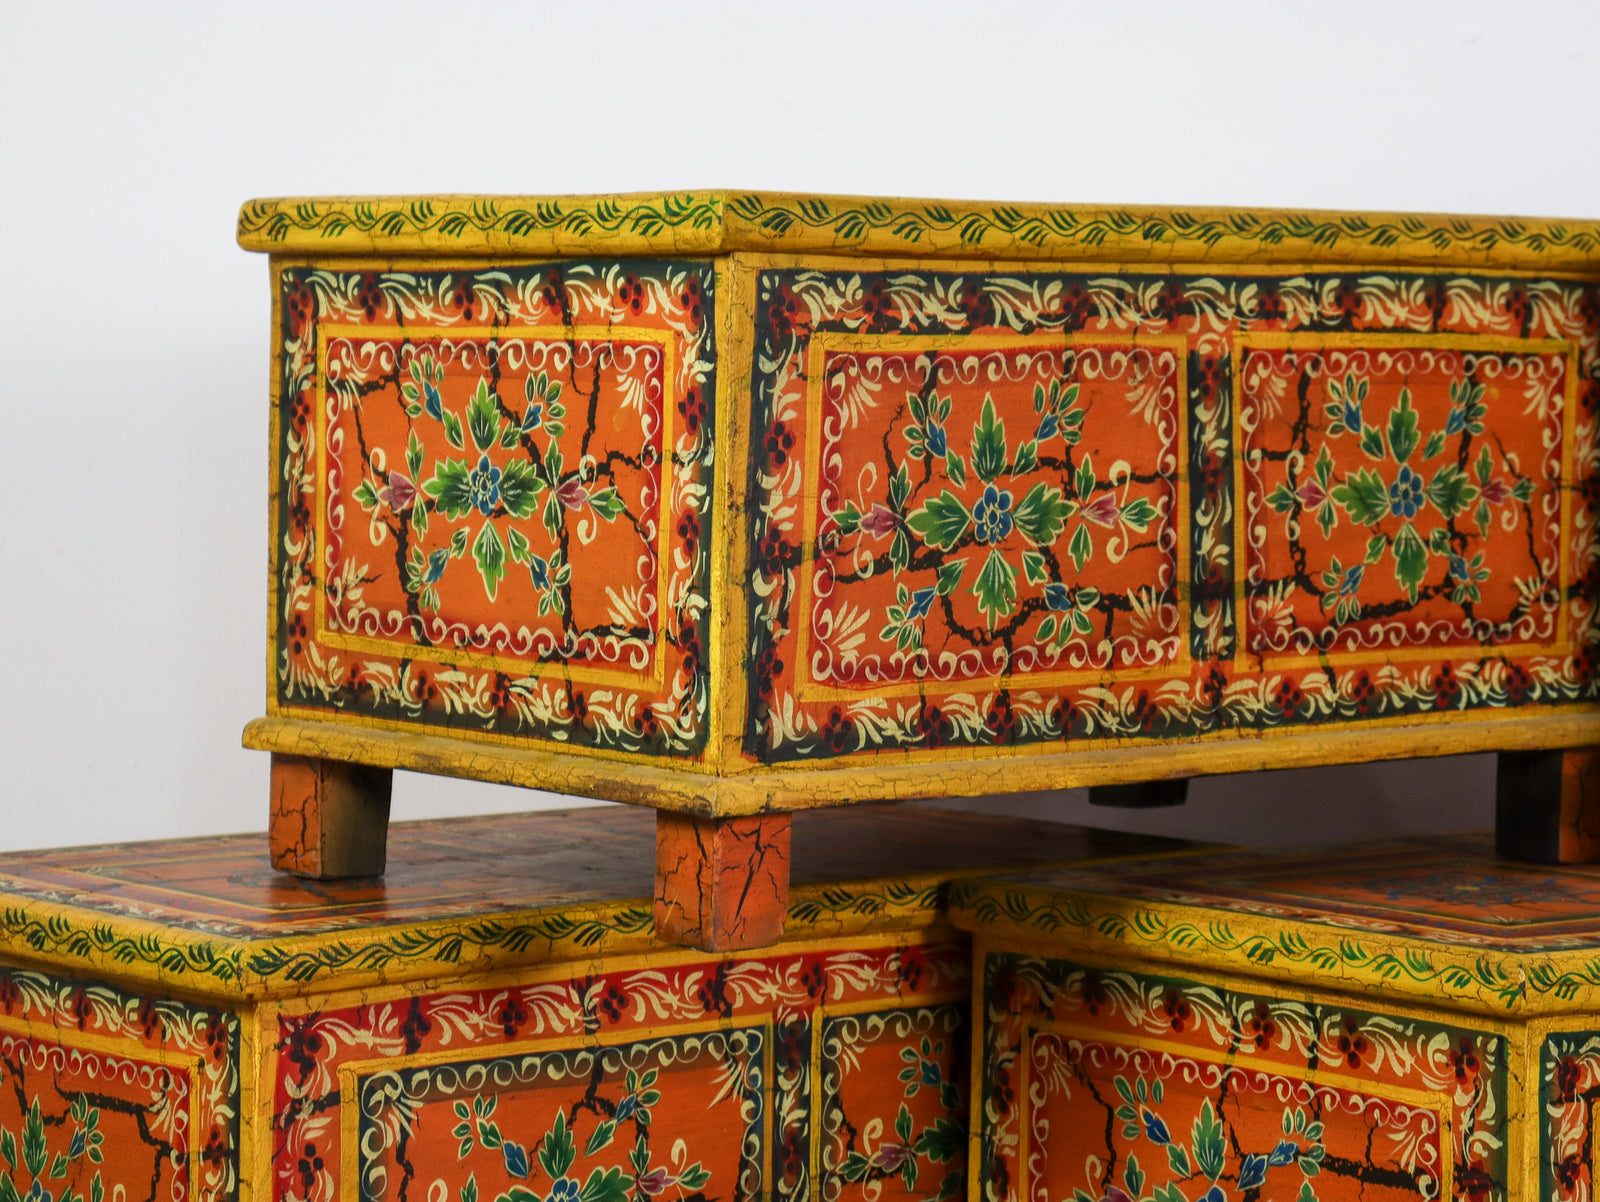 MILL-1449/14 Hand Painted Wooden Chest C29